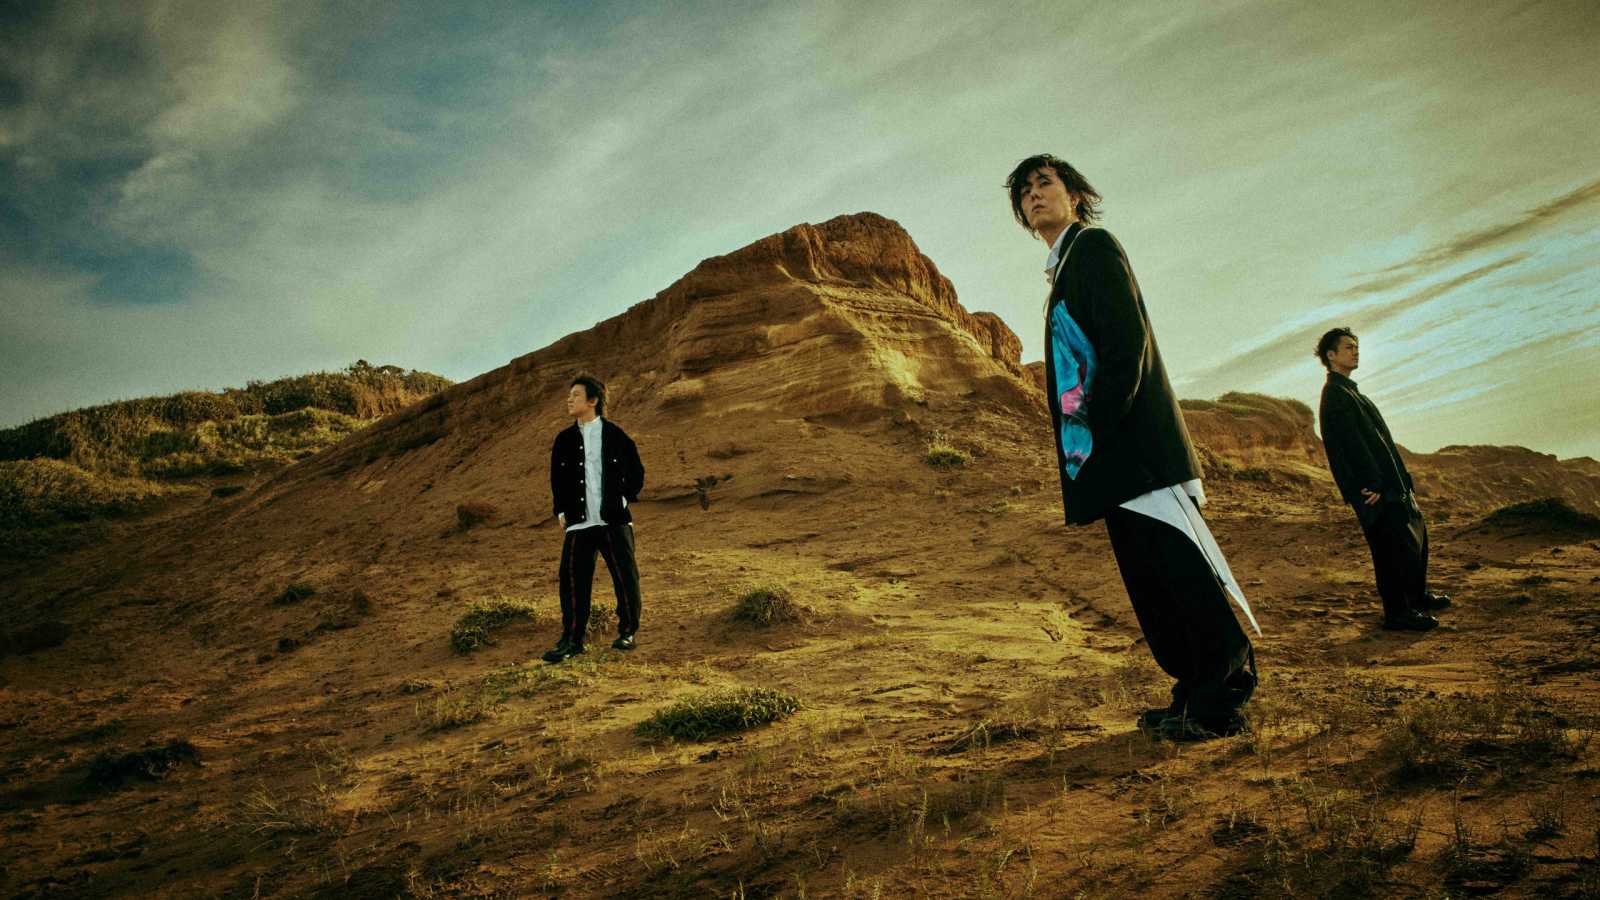 Interview with RADWIMPS © RADWIMPS. All rights reserved.